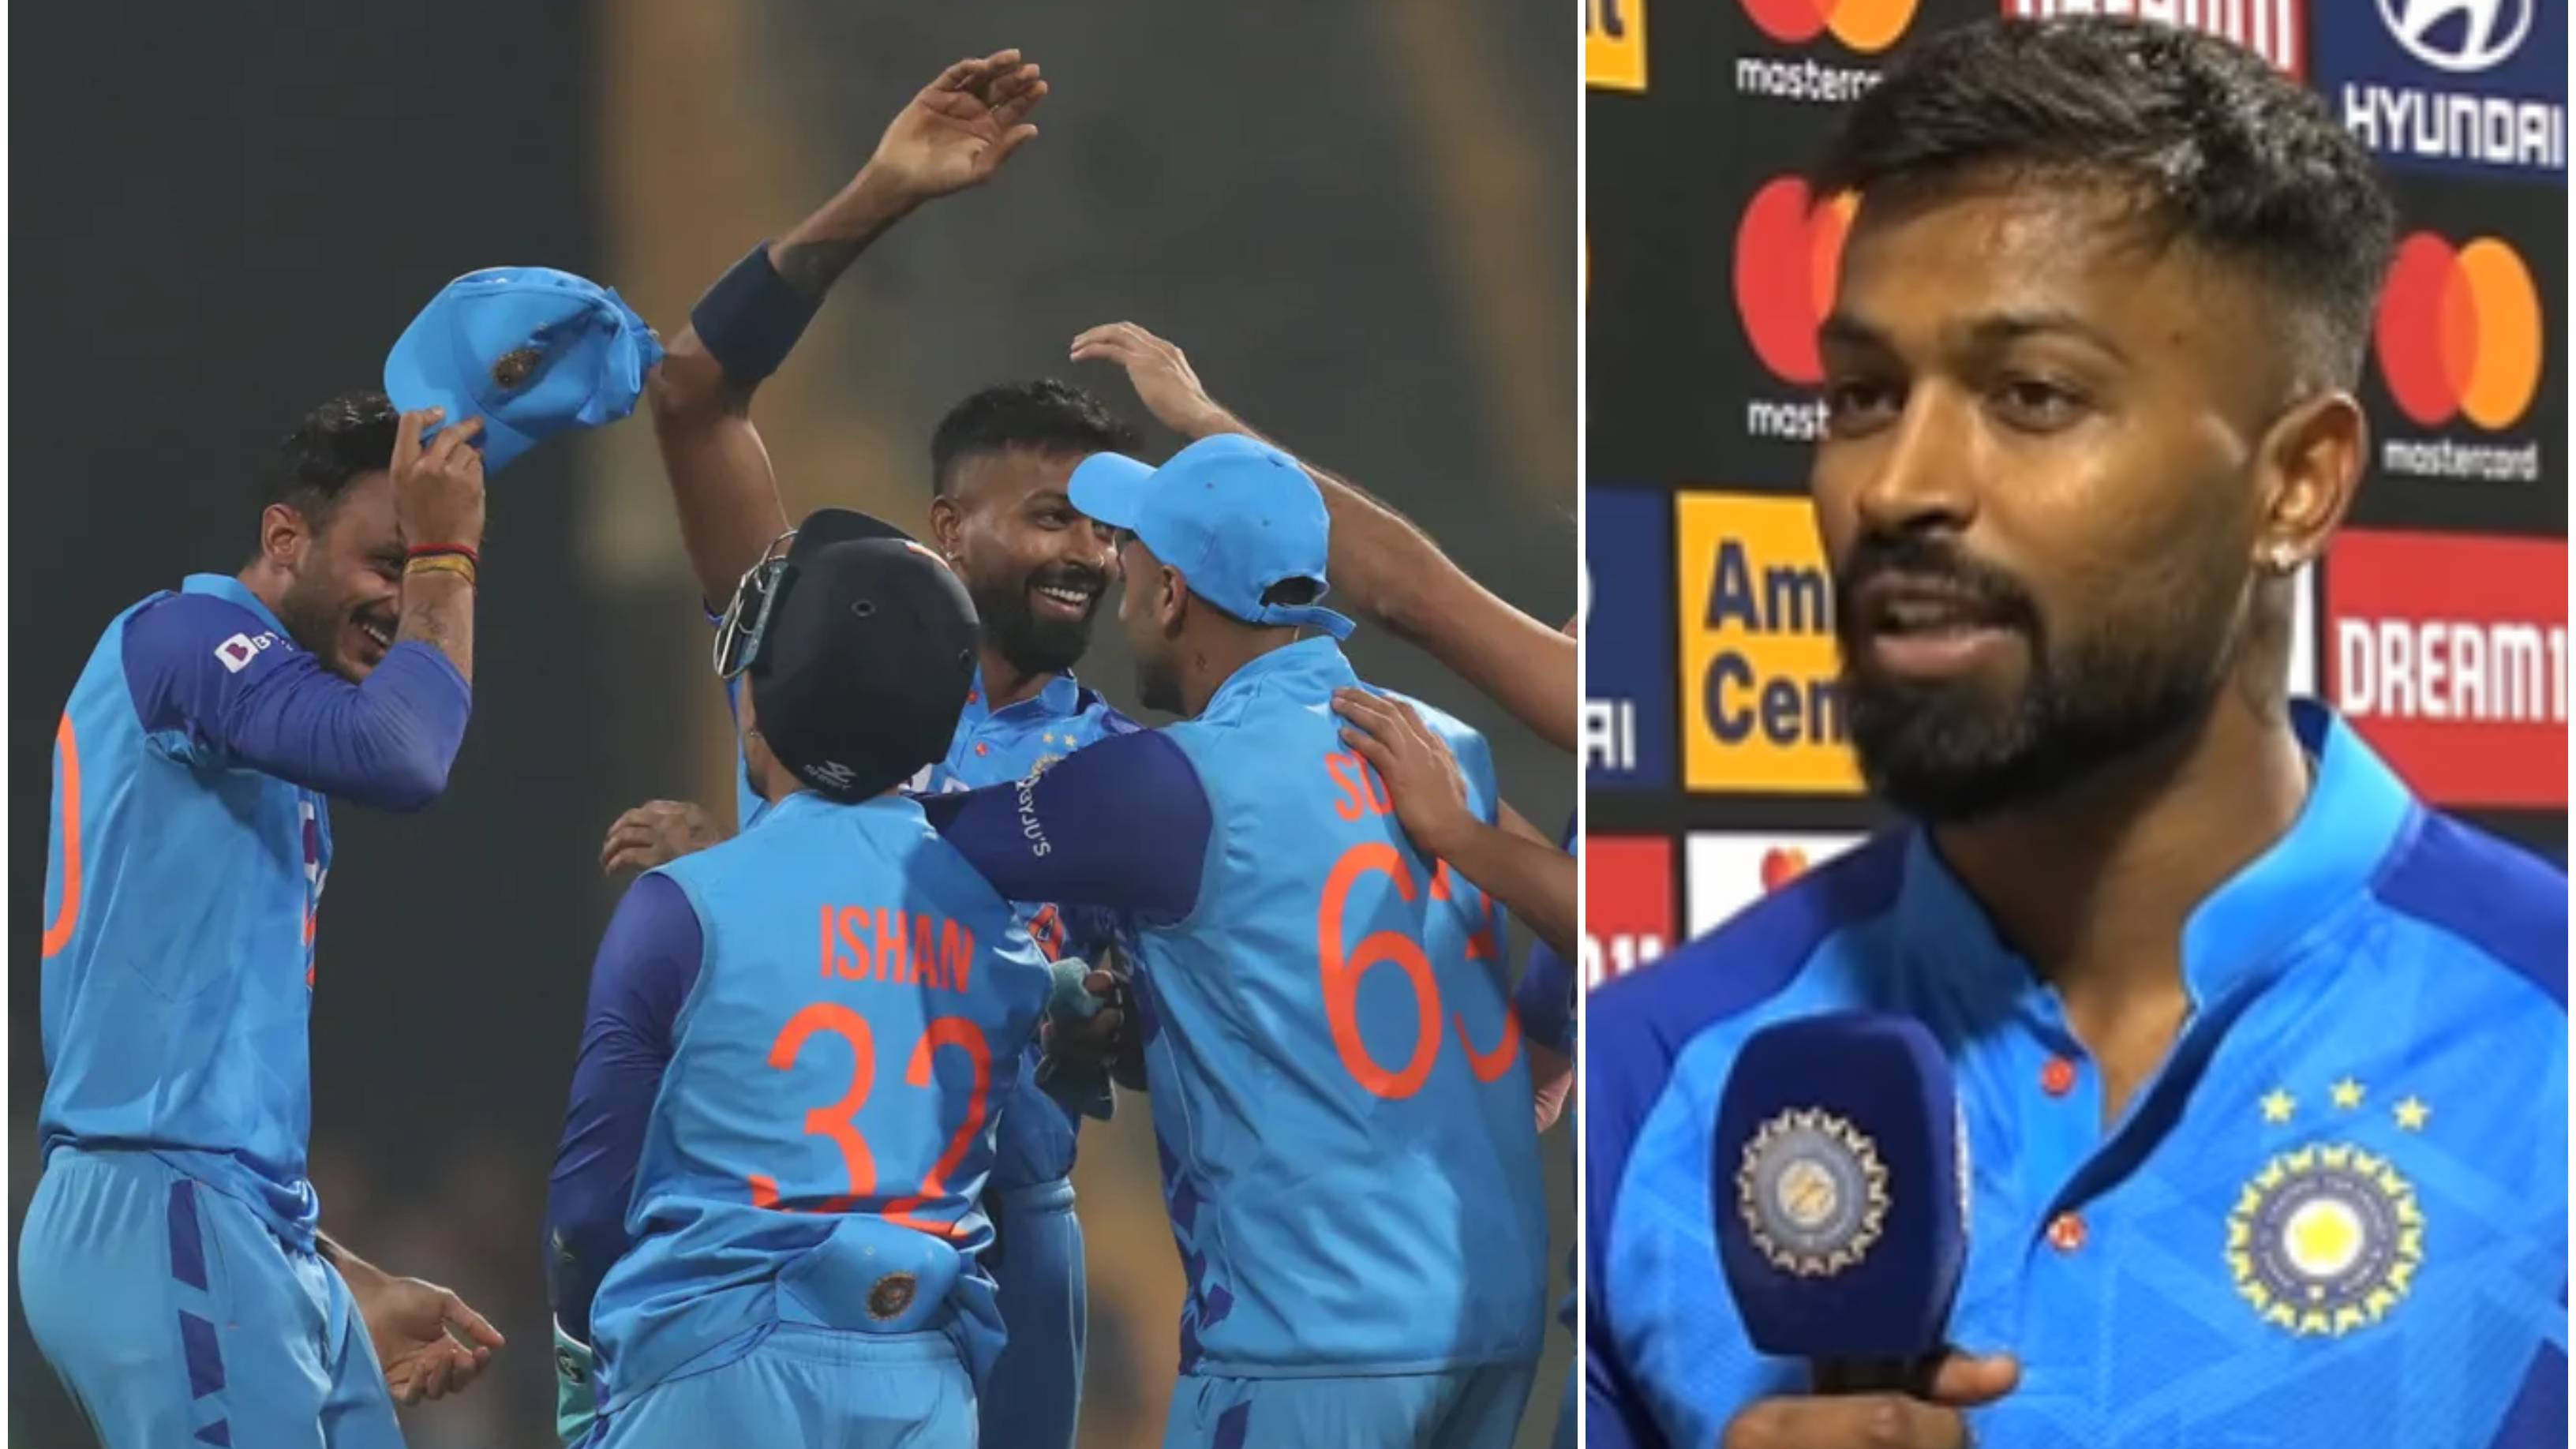 IND v SL 2023: “I want to put this team in difficult situations,” Hardik Pandya on giving final over to Akshar Patel